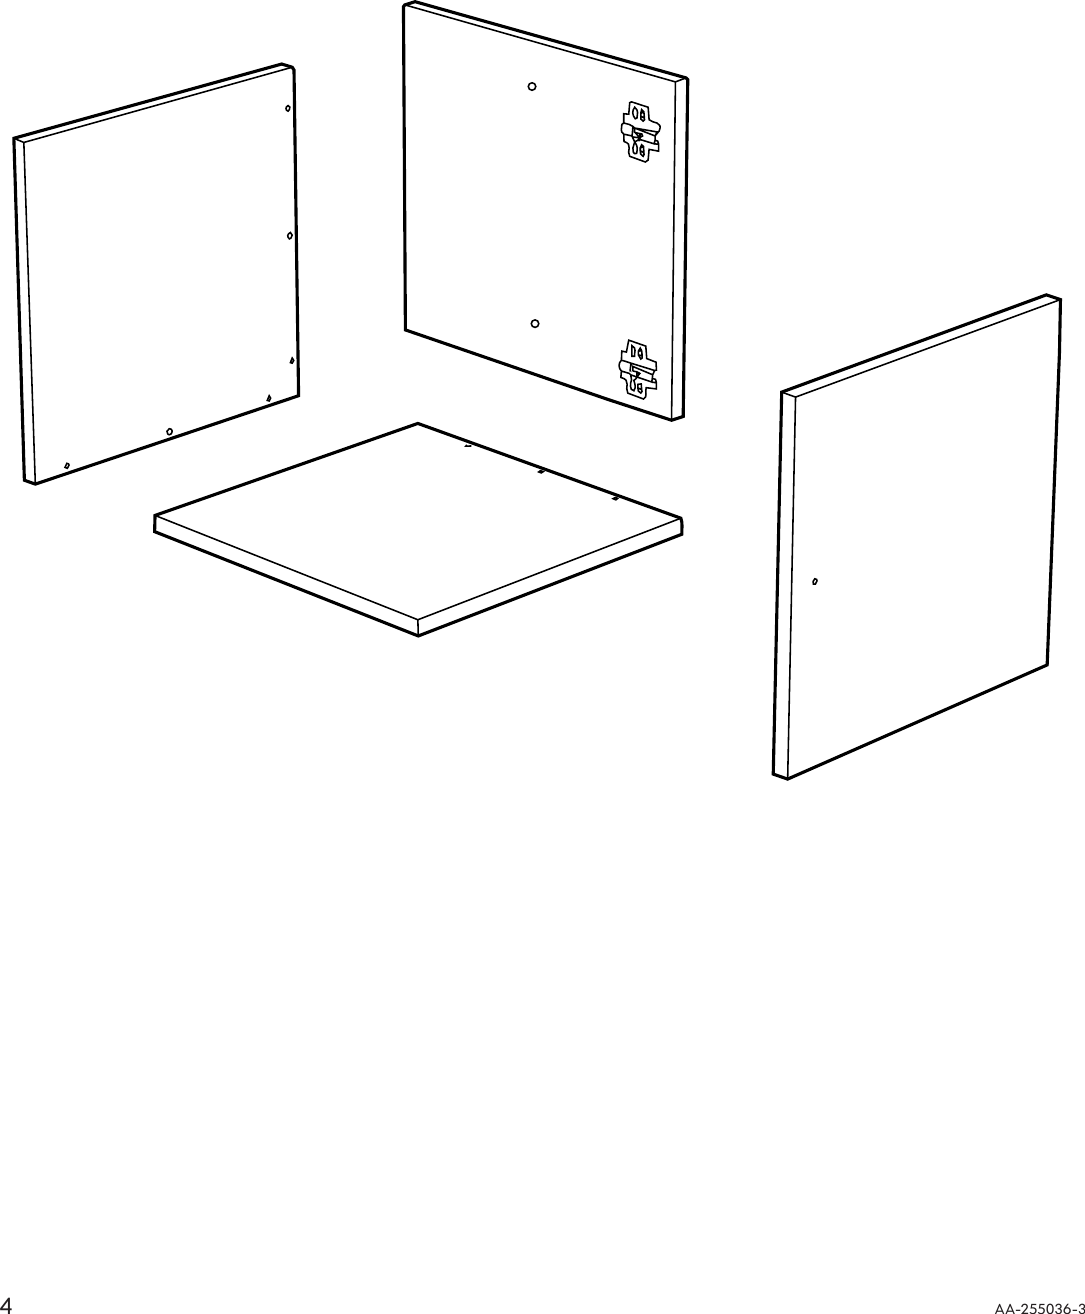 Page 4 of 12 - Ikea Ikea-Expedit-Insert-Door-13X13-Assembly-Instruction